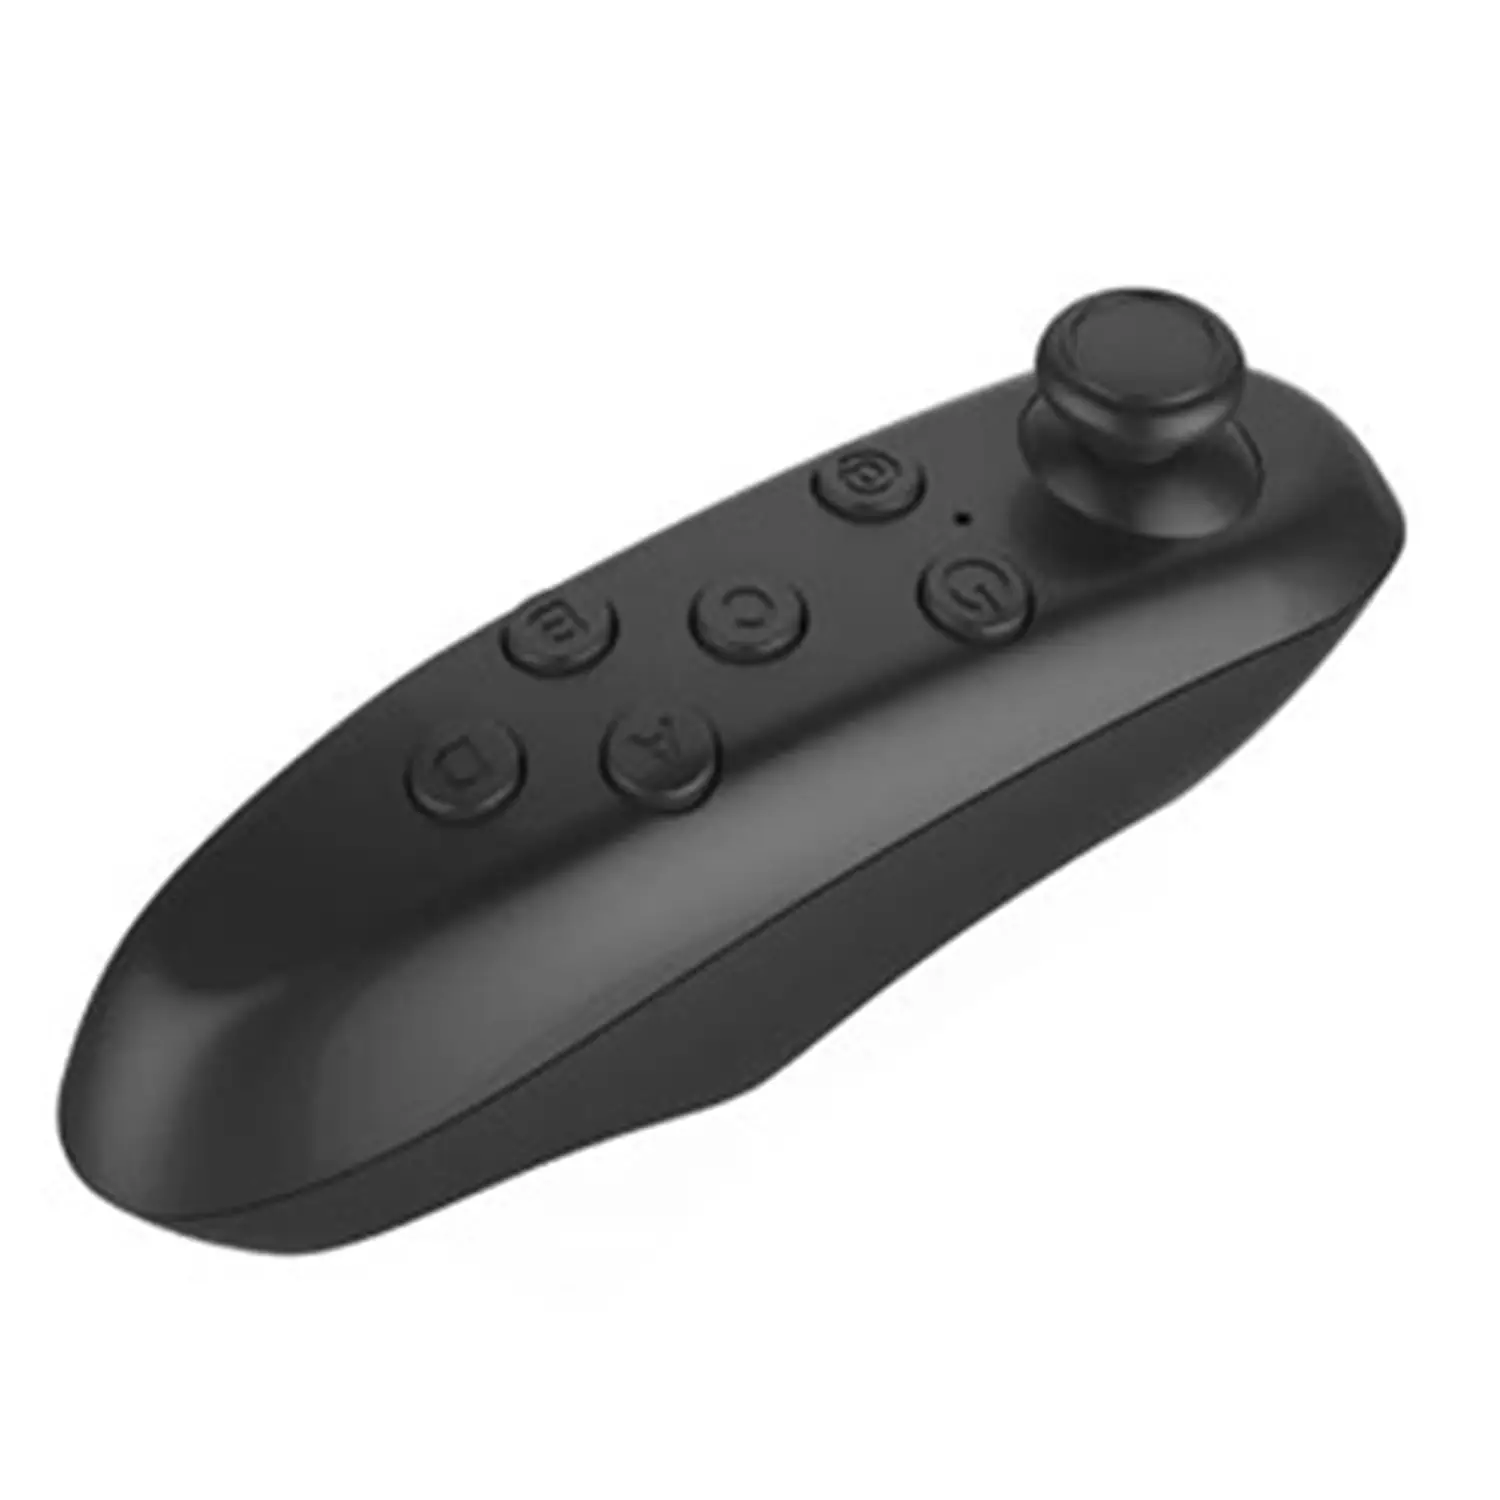 Remote Control For Bluetooth Devices And 3D Virtual Reality Headsets